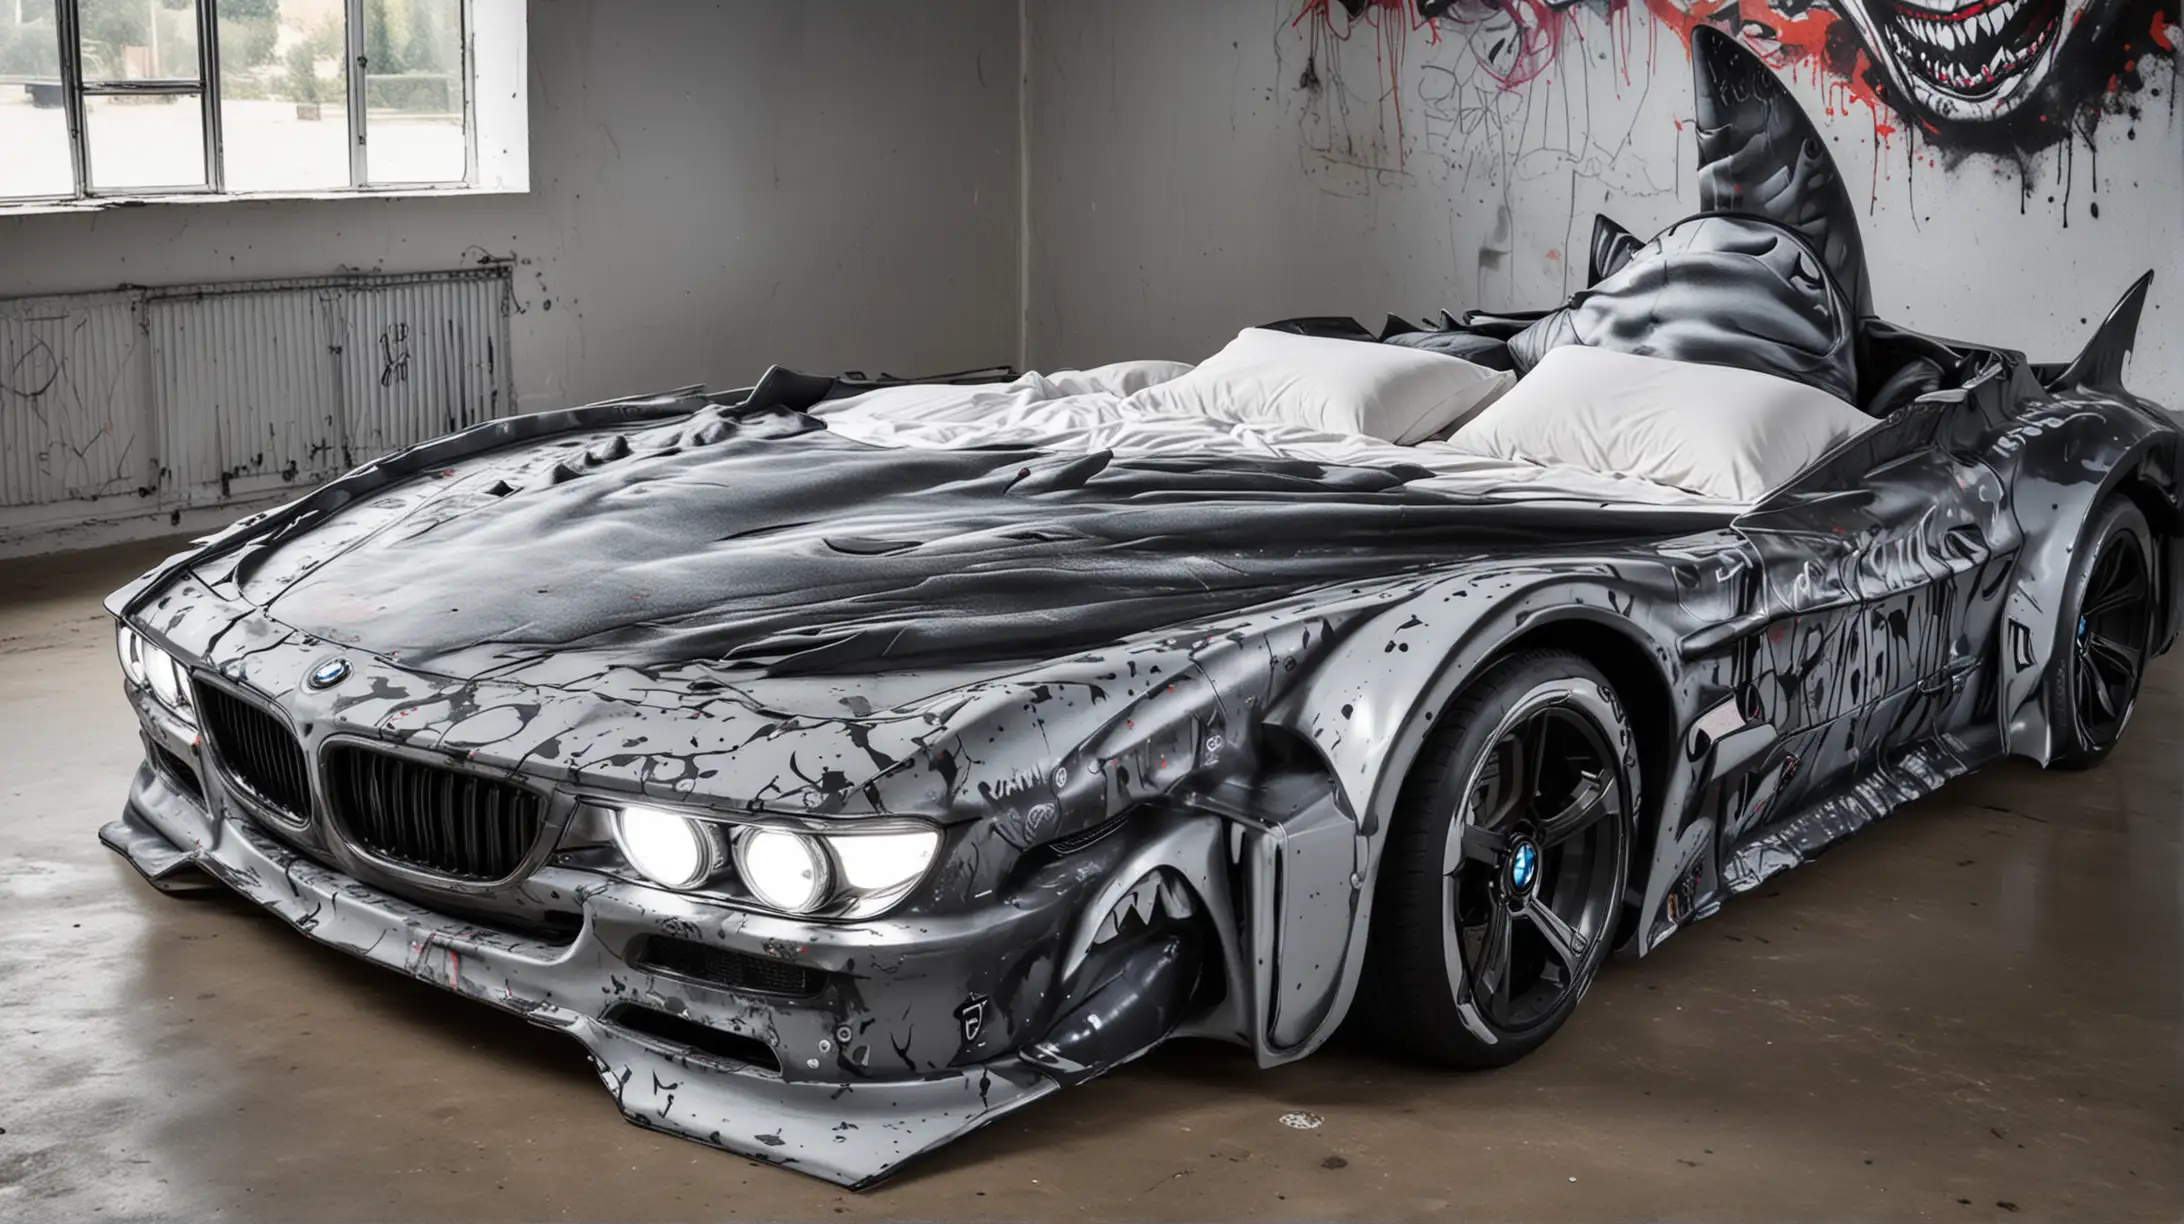 Double bed in the shape of a BMW car with headlights on with evil Shark graffiti